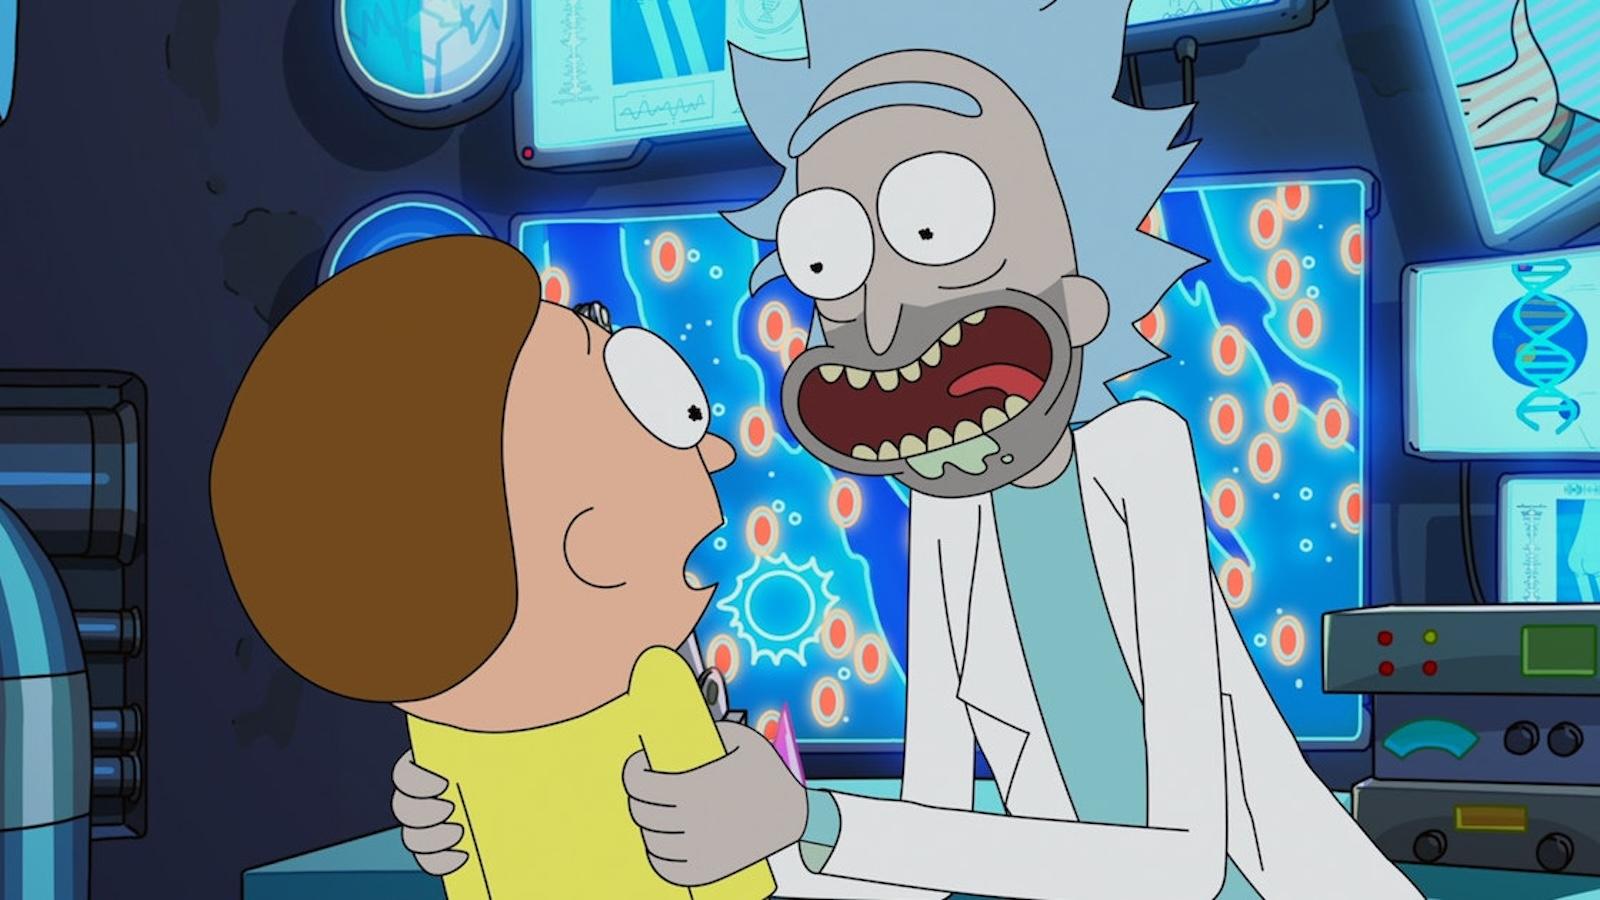 Rick and Morty in the Season 6 finale